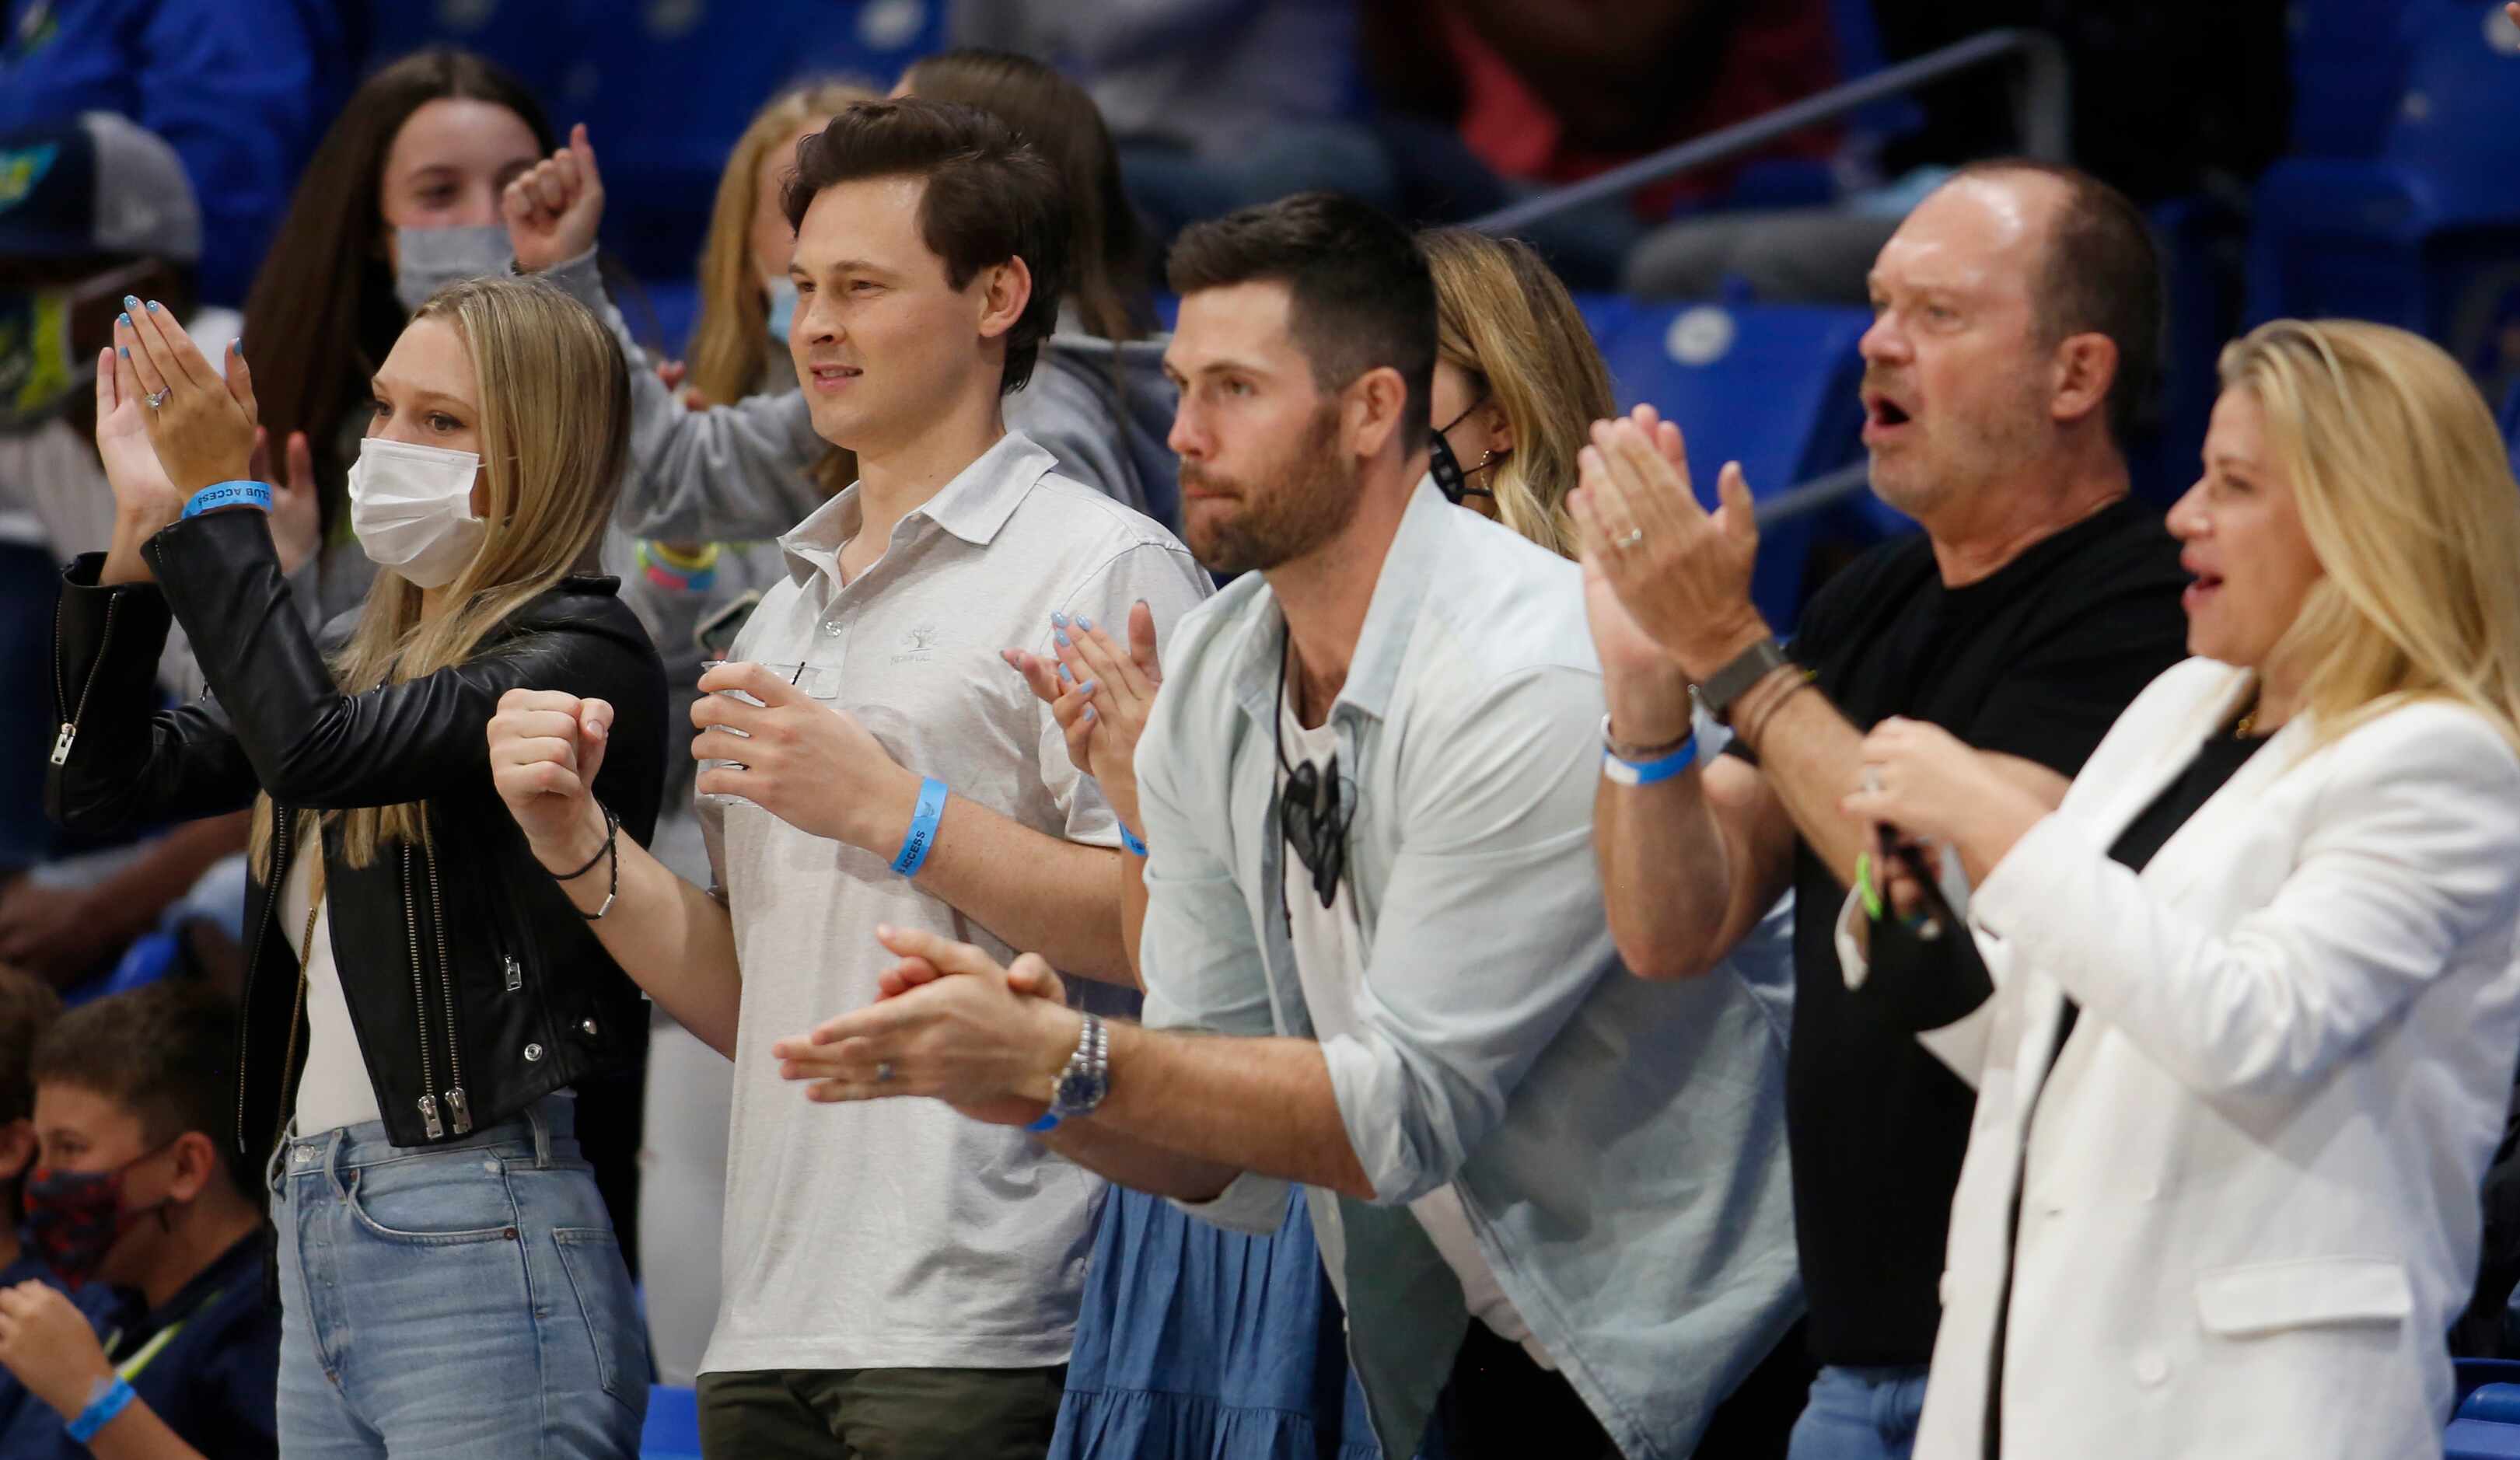 Dallas Wings fans react to a play during the 4th quarter of their game against Seattle. The...